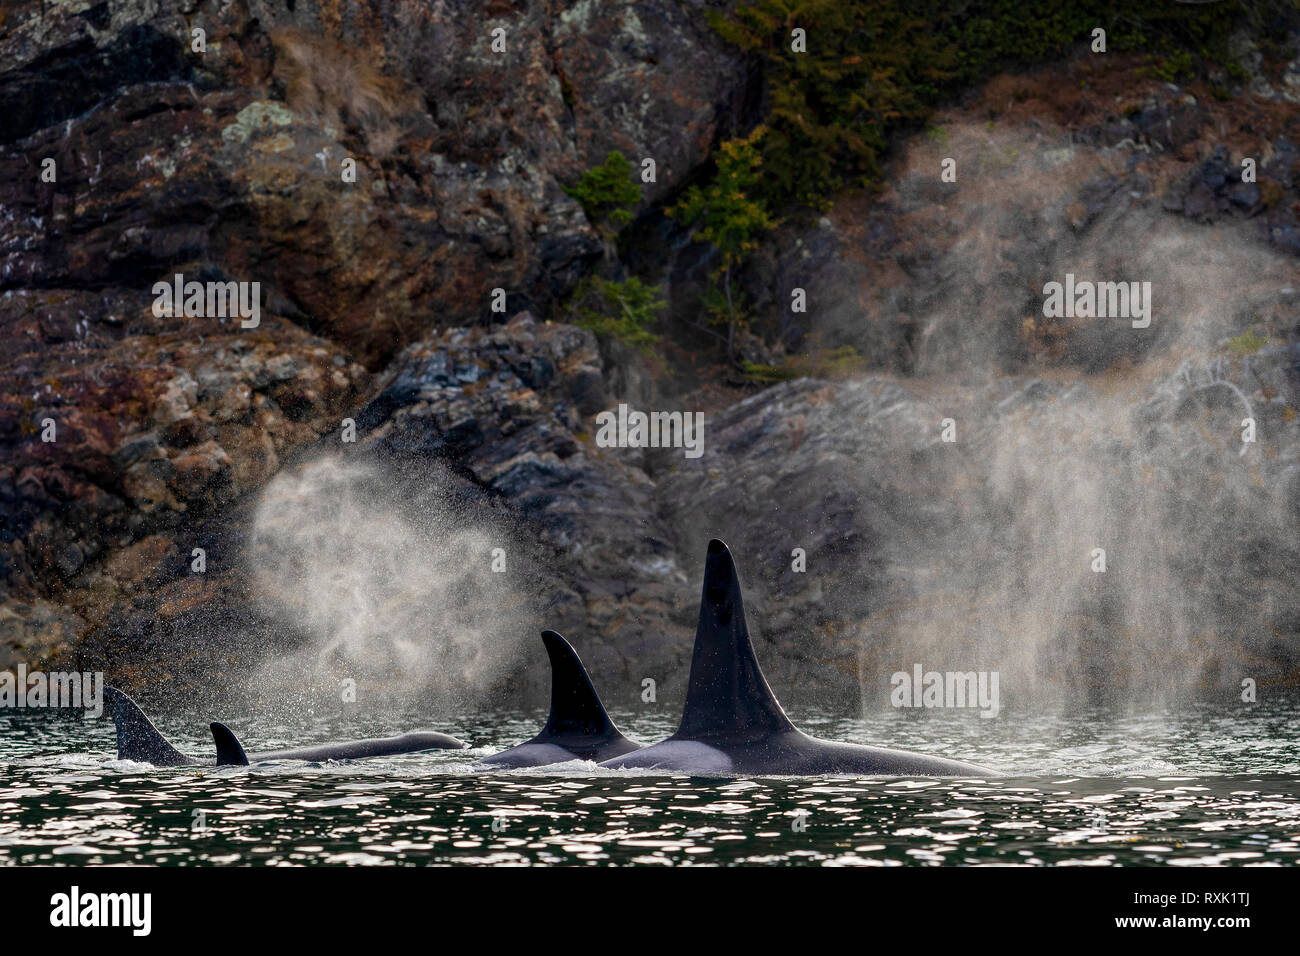 Northern resident orca whale pod (killer whales, Orcinus orca) travelling through Johnstone Strait close to the Hanson island shoreline on a late afternoon, First Nations Territory, Vancouver Island, British Columbia, Canada. Stock Photo